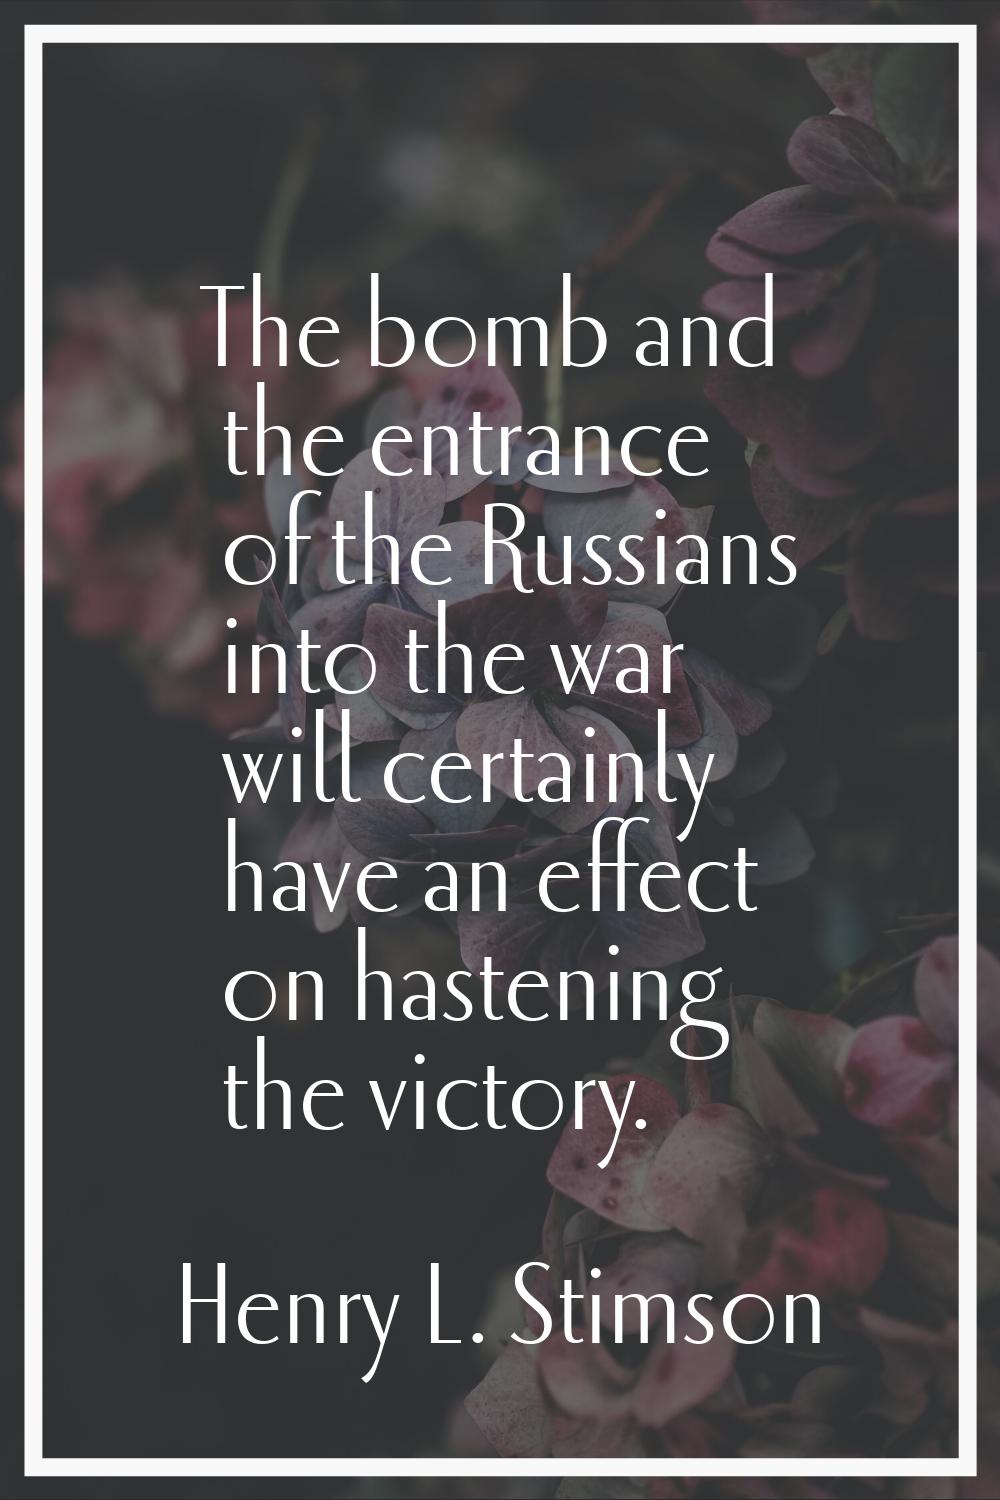 The bomb and the entrance of the Russians into the war will certainly have an effect on hastening t